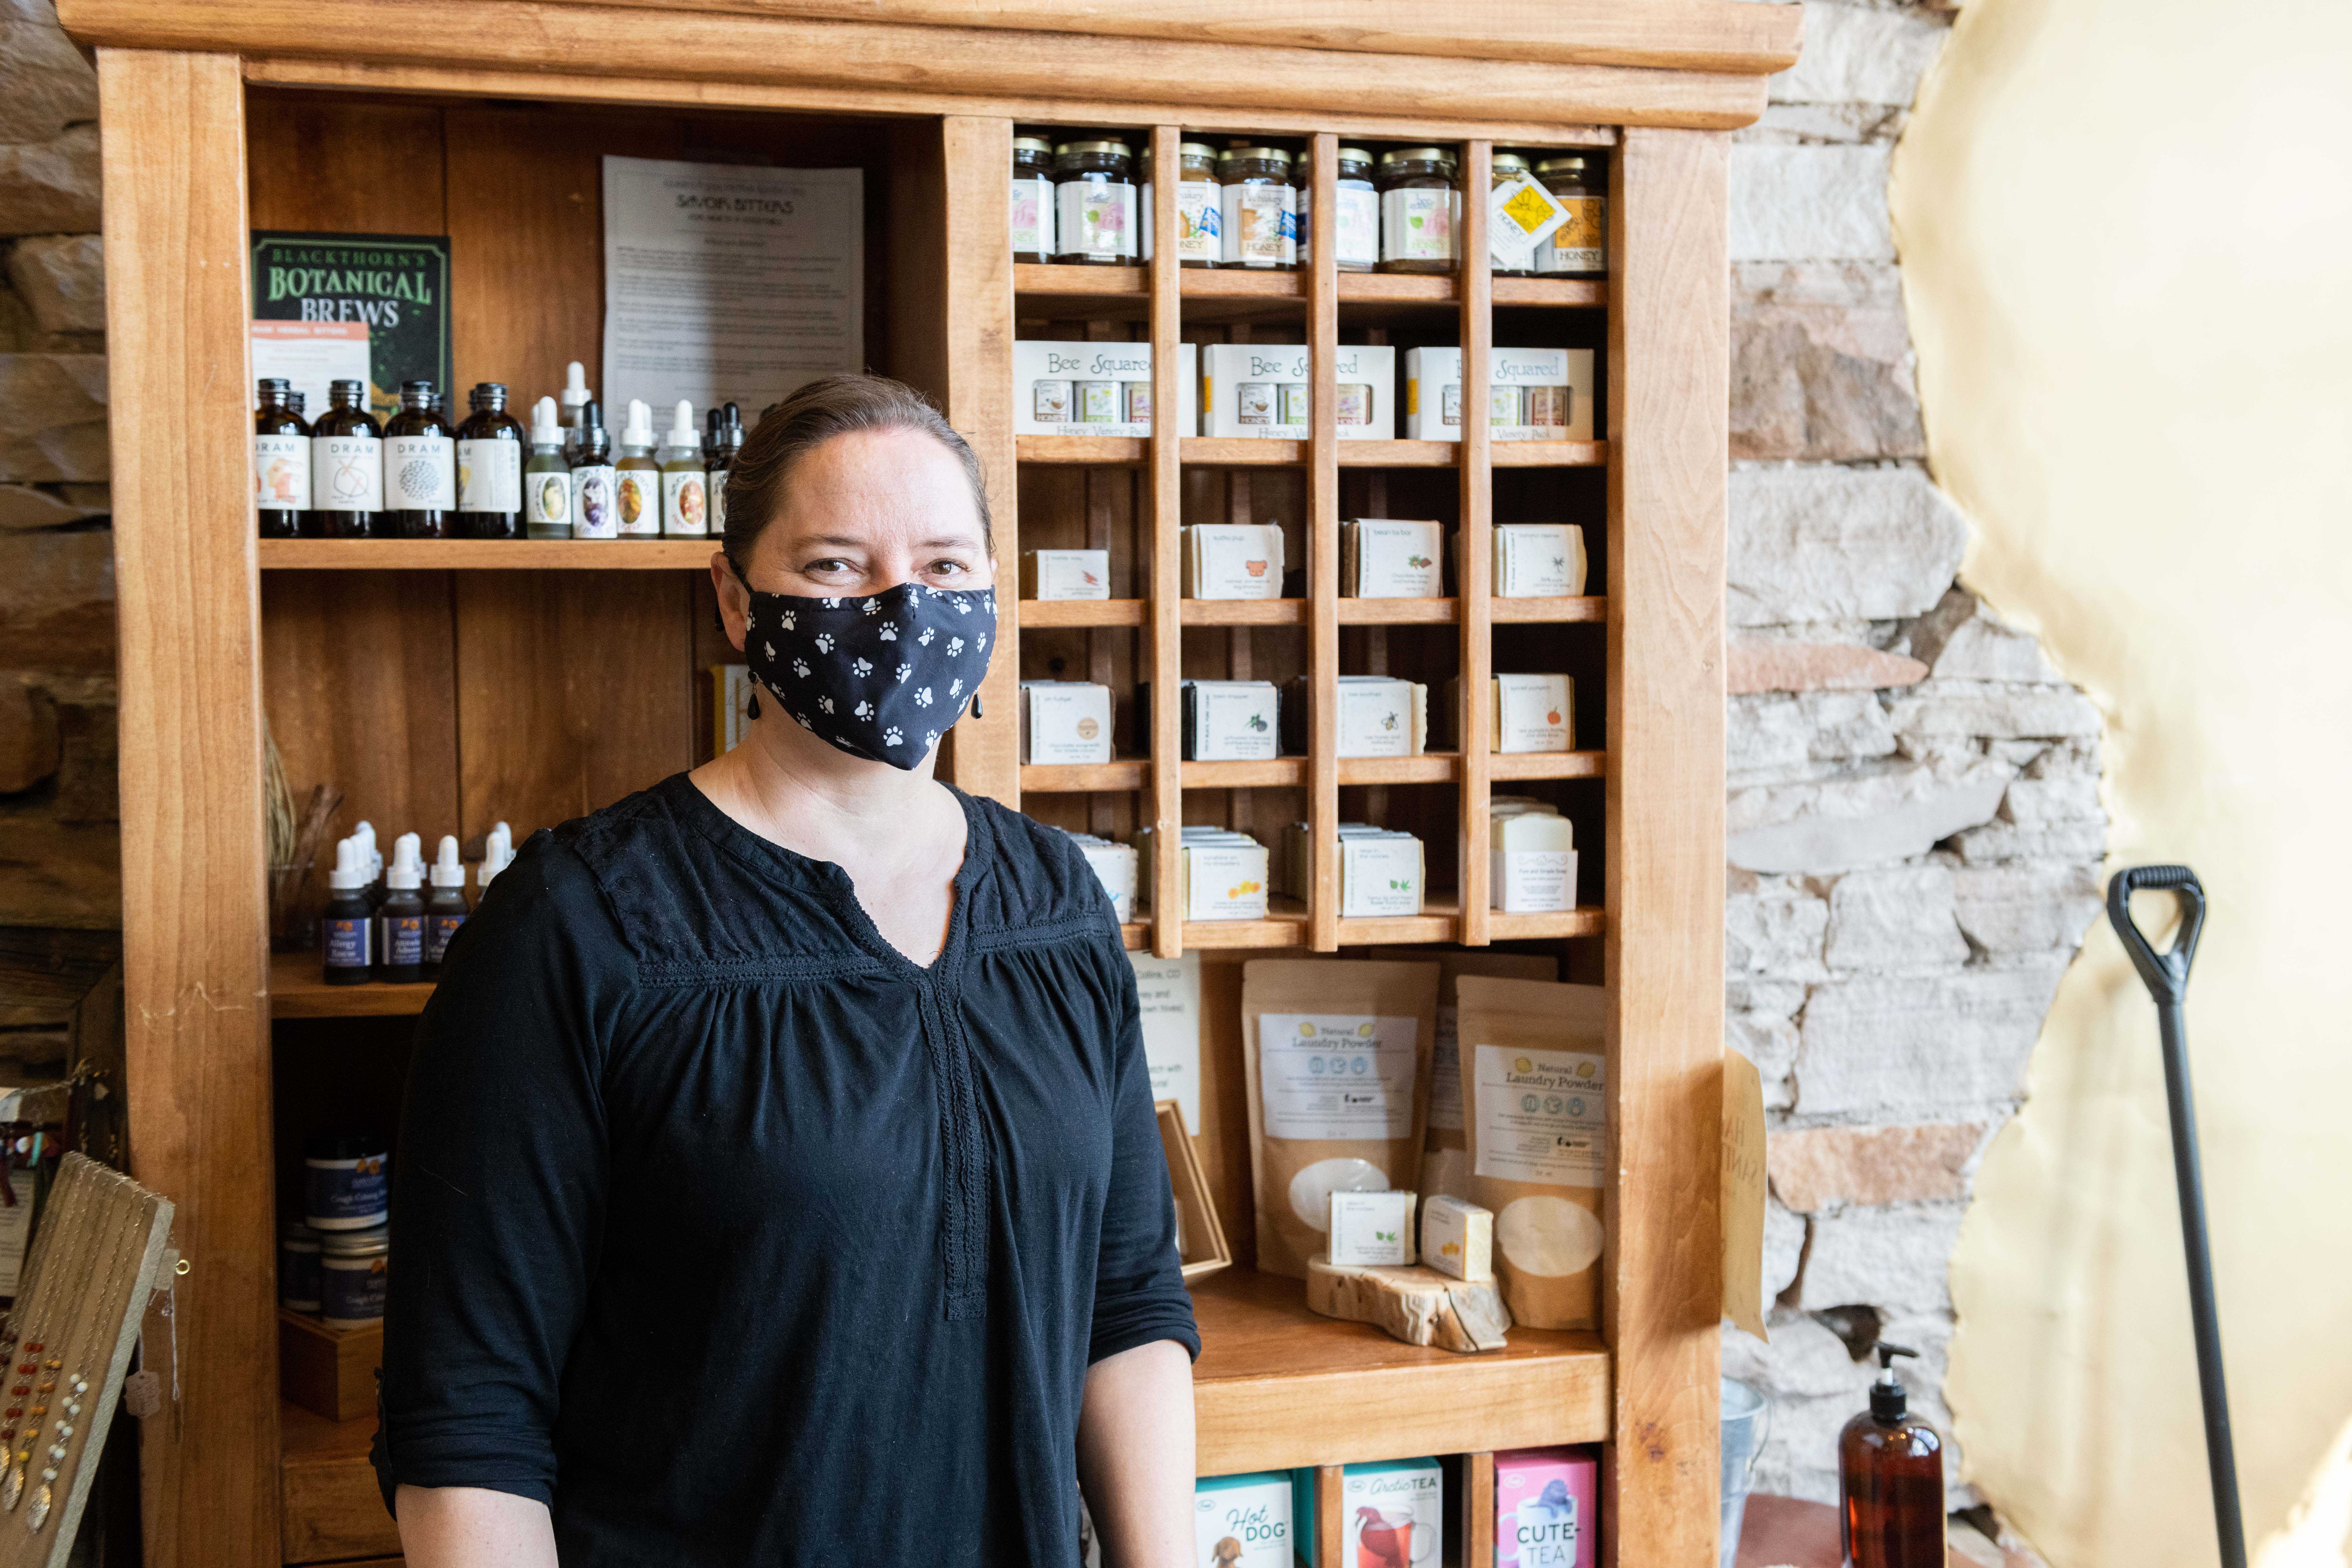 Marisa May, Sunlit Mountain founder, stands next to a shelf of her products